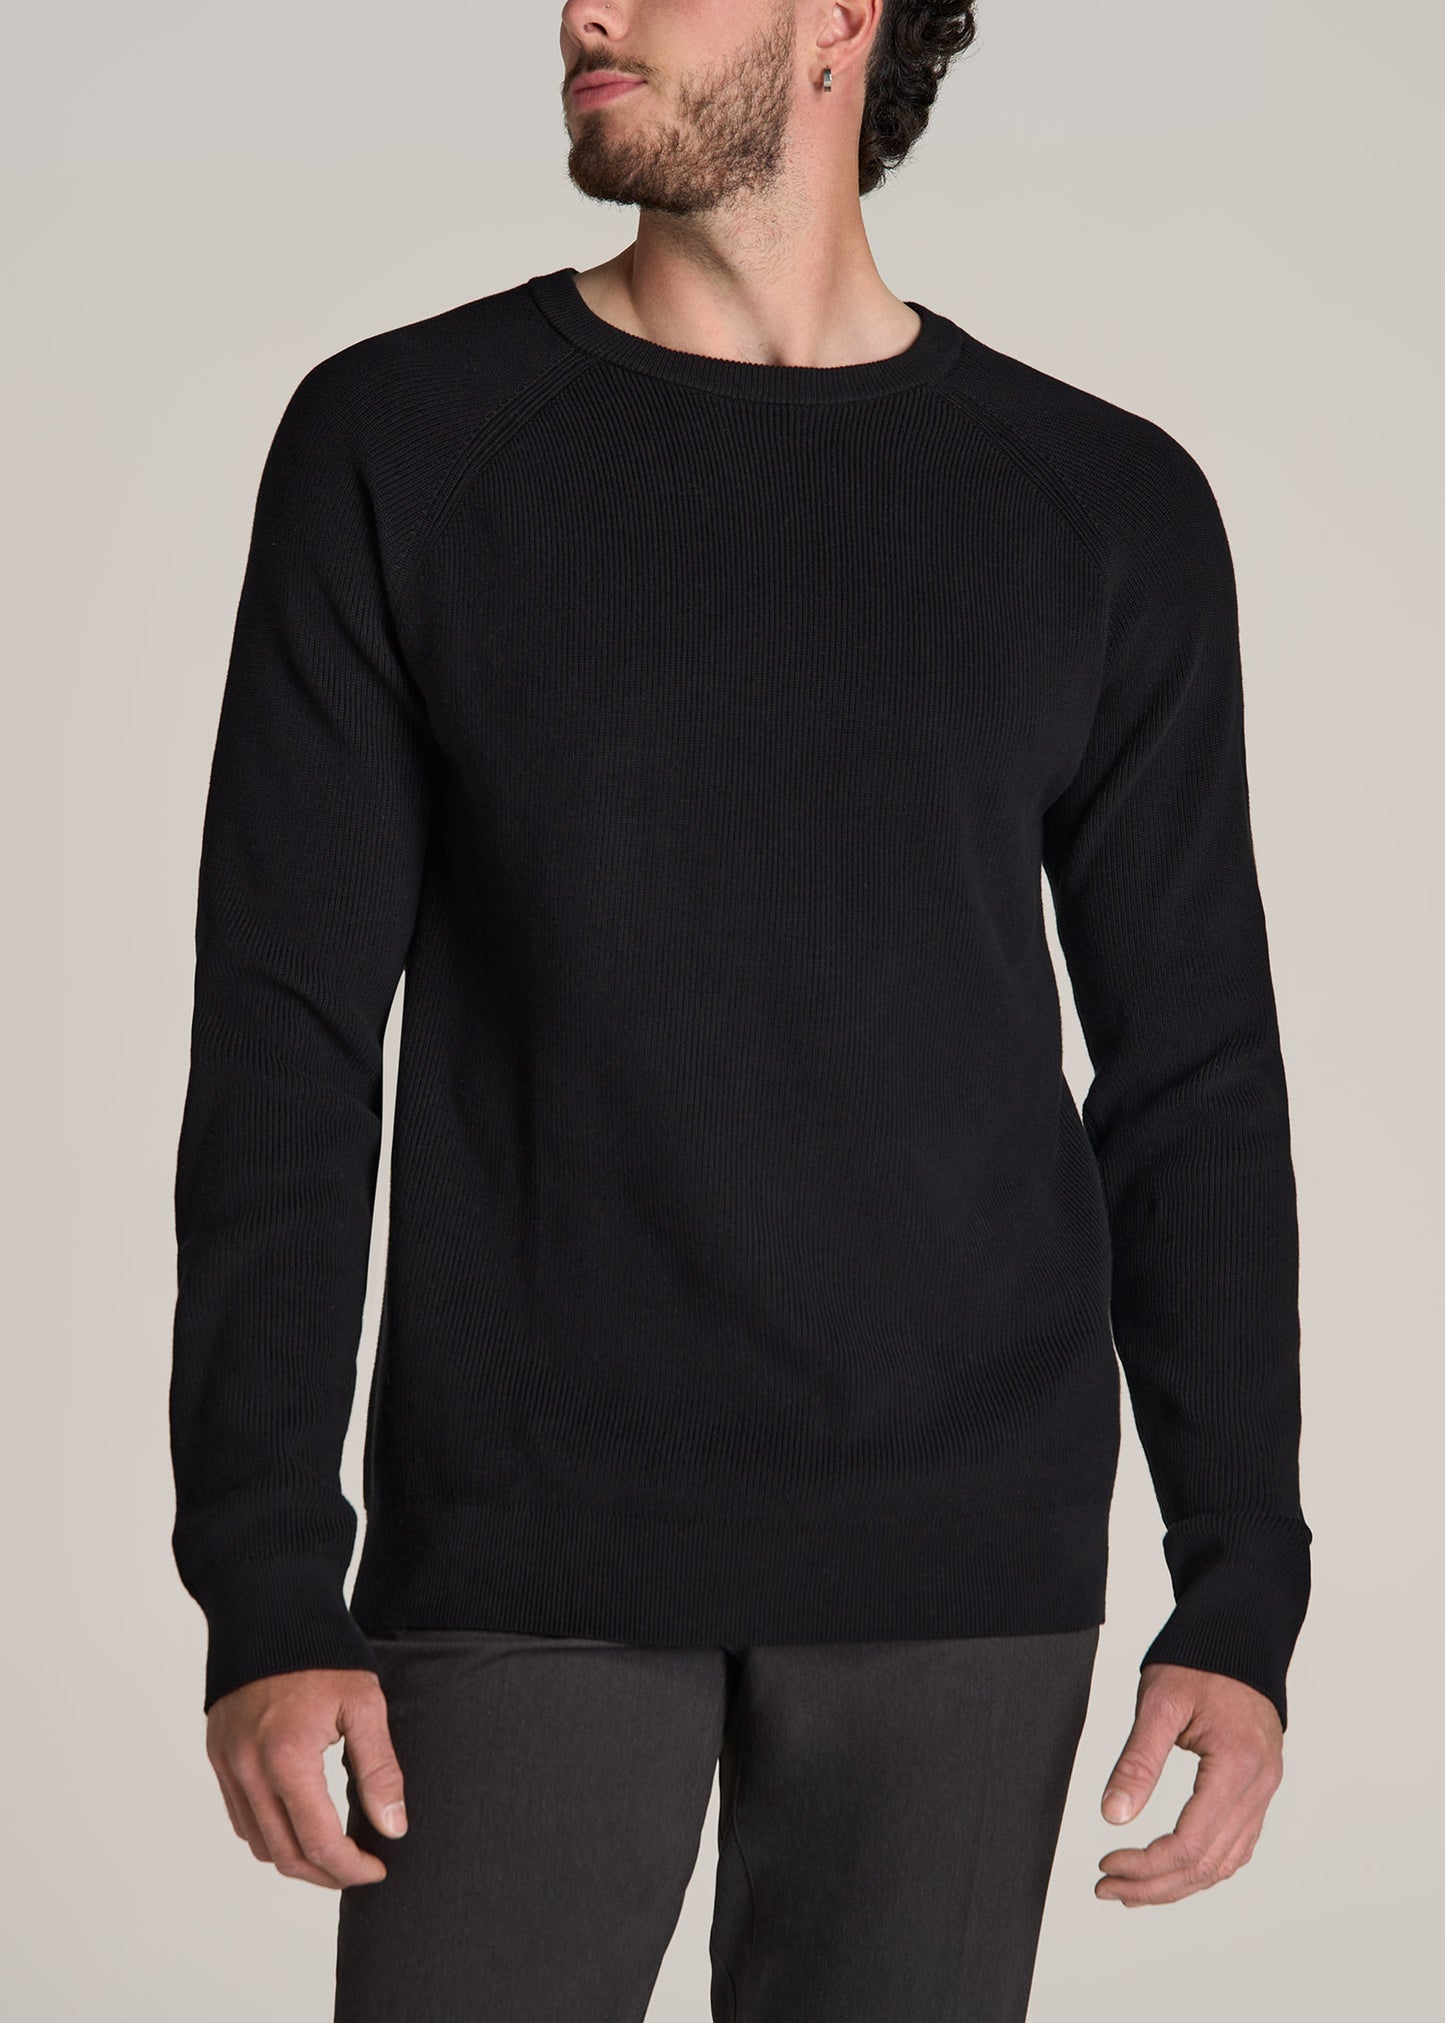 Textured Knit Sweater for Tall Men | American Tall